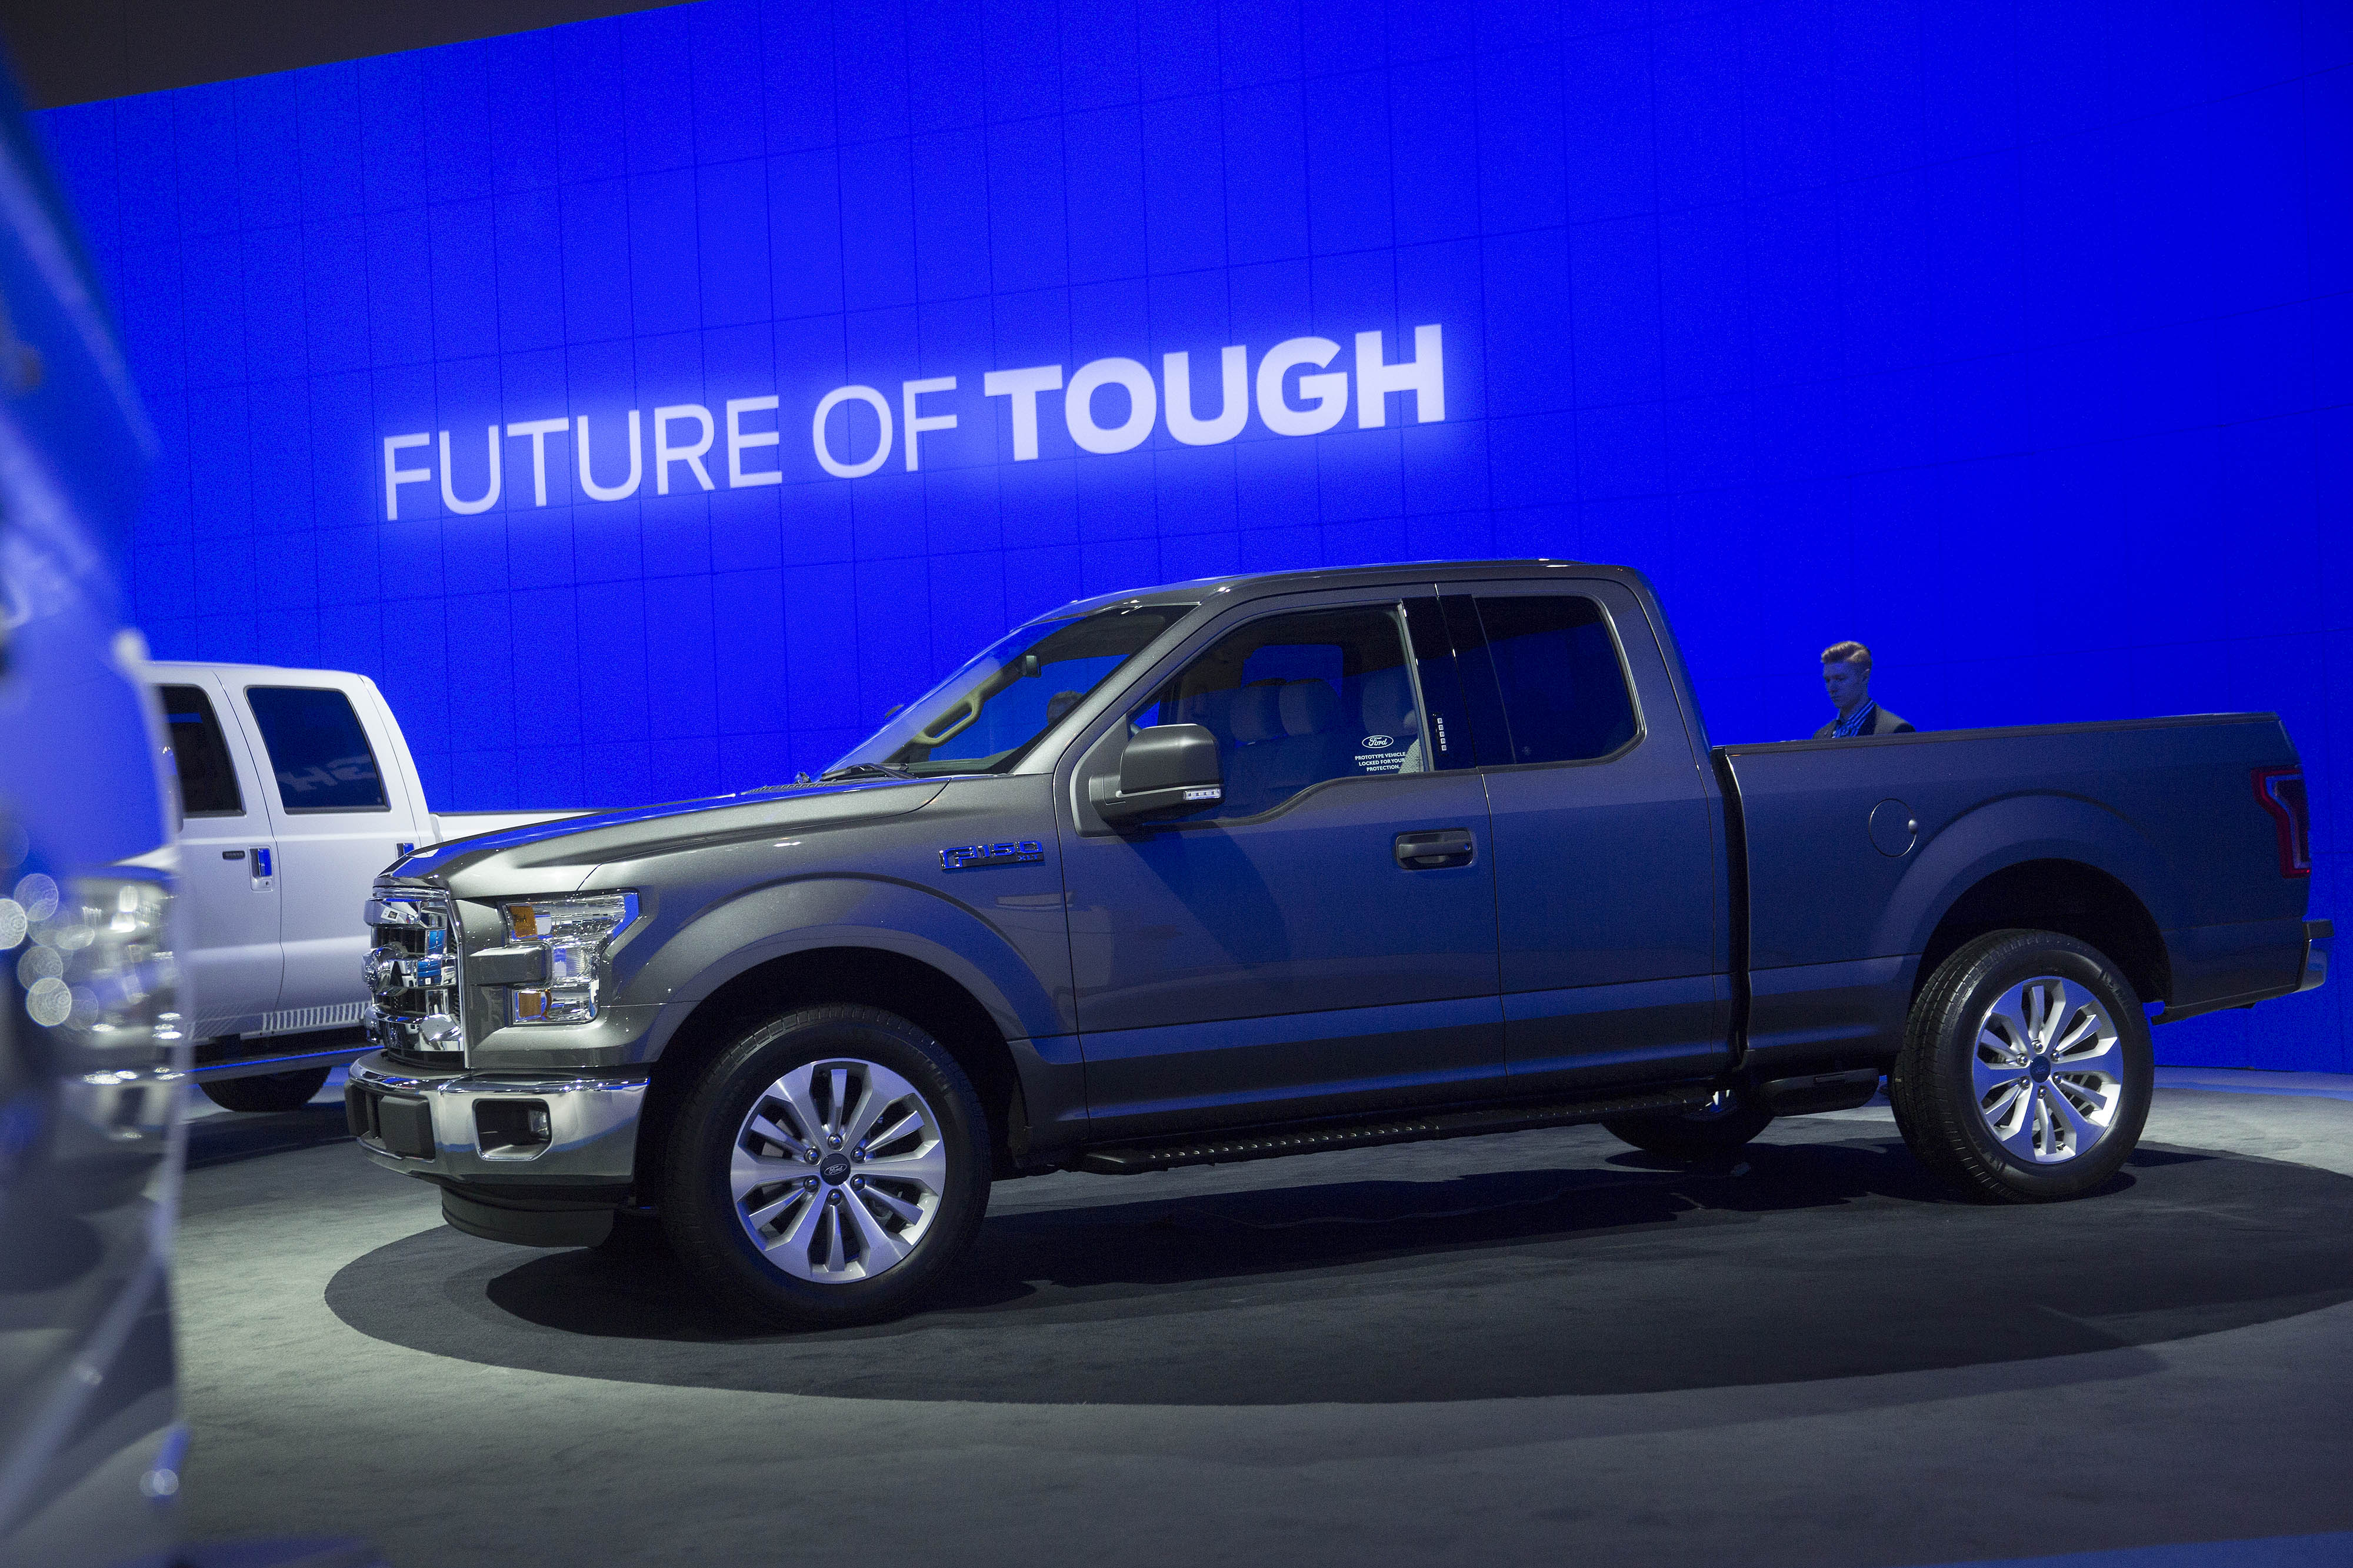 An attendee looks at the Ford Motor Co. F-150 pickup truck during the Washington Auto Show in Washington, D.C., U.S., on Wednesday, Jan. 22, 2014. (Bloomberg via Getty Images)